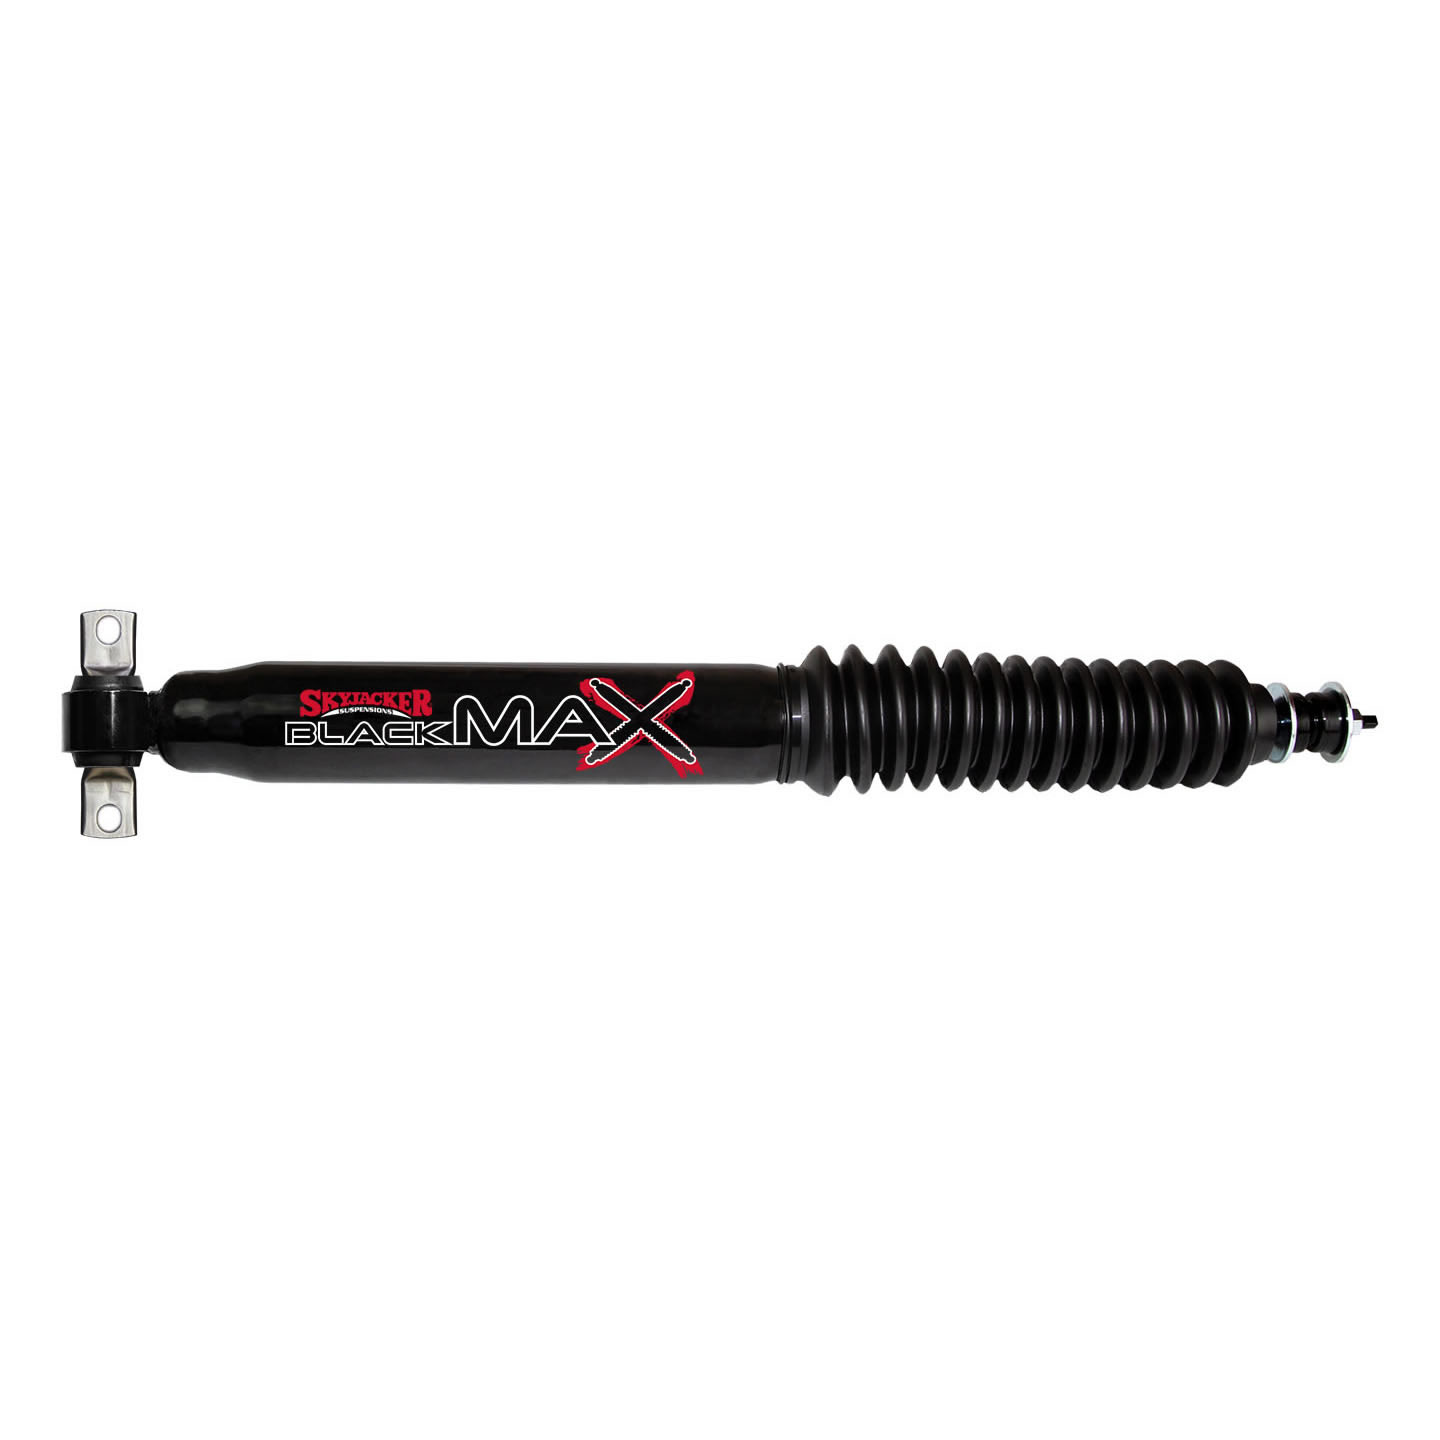 Black MAX Shock Absorber w/Black Boot  Inch Extended  Inch  Collapsed 84-01 Jeep Cherokee 86-92 Jeep Comanche 93-04 Jeep Grand Cherokee  97-06 Jeep TJ 97-06 Jeep Wrangler Skyjacker | Southern Off Road